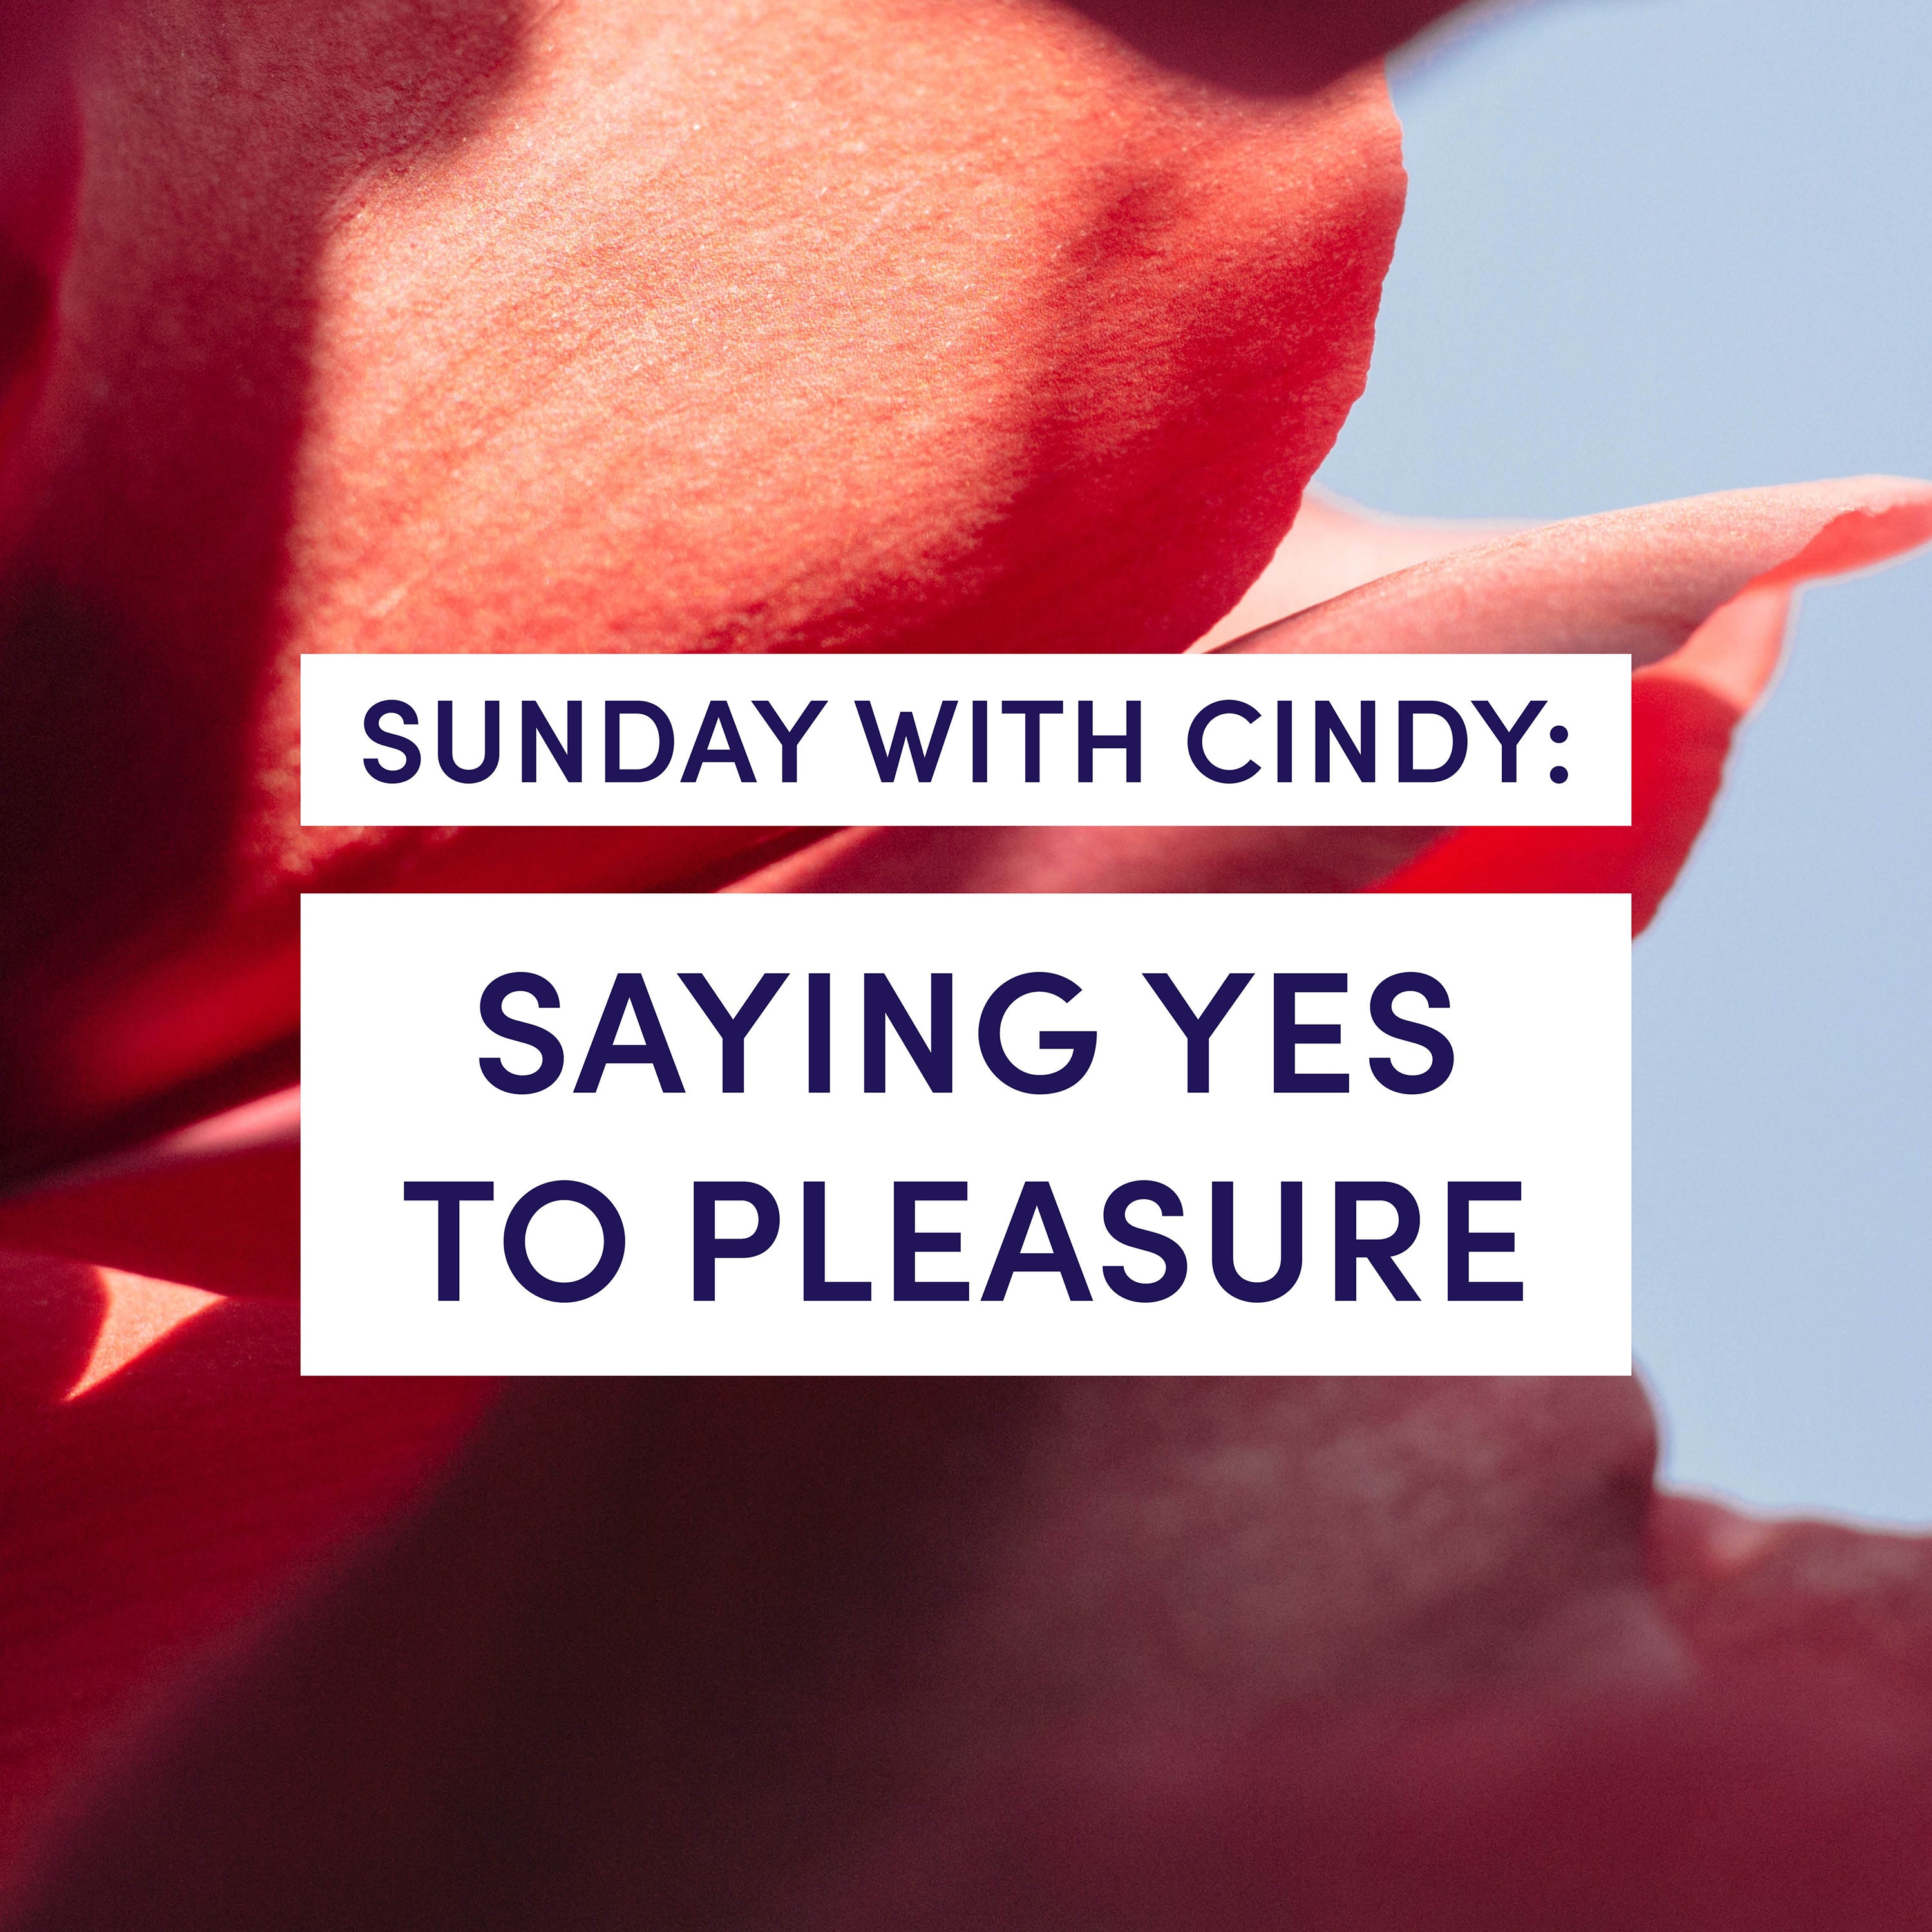 Sunday with Cindy: Saying Yes to Pleasure